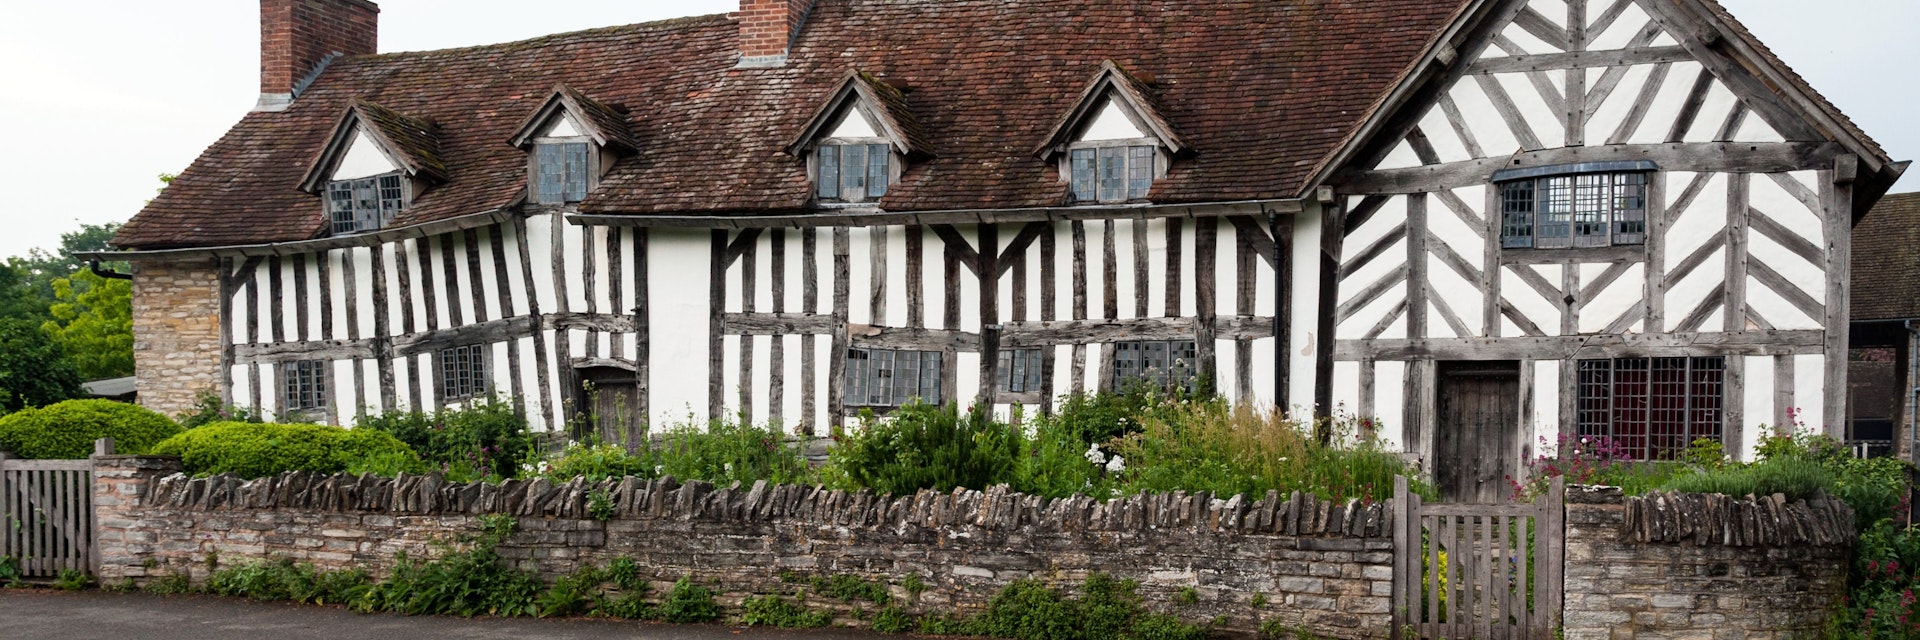 Ancient historic home and farm of Mary Arden, mother of William Shakespeare, built around the 15th century in the village of Wilmcote - UK